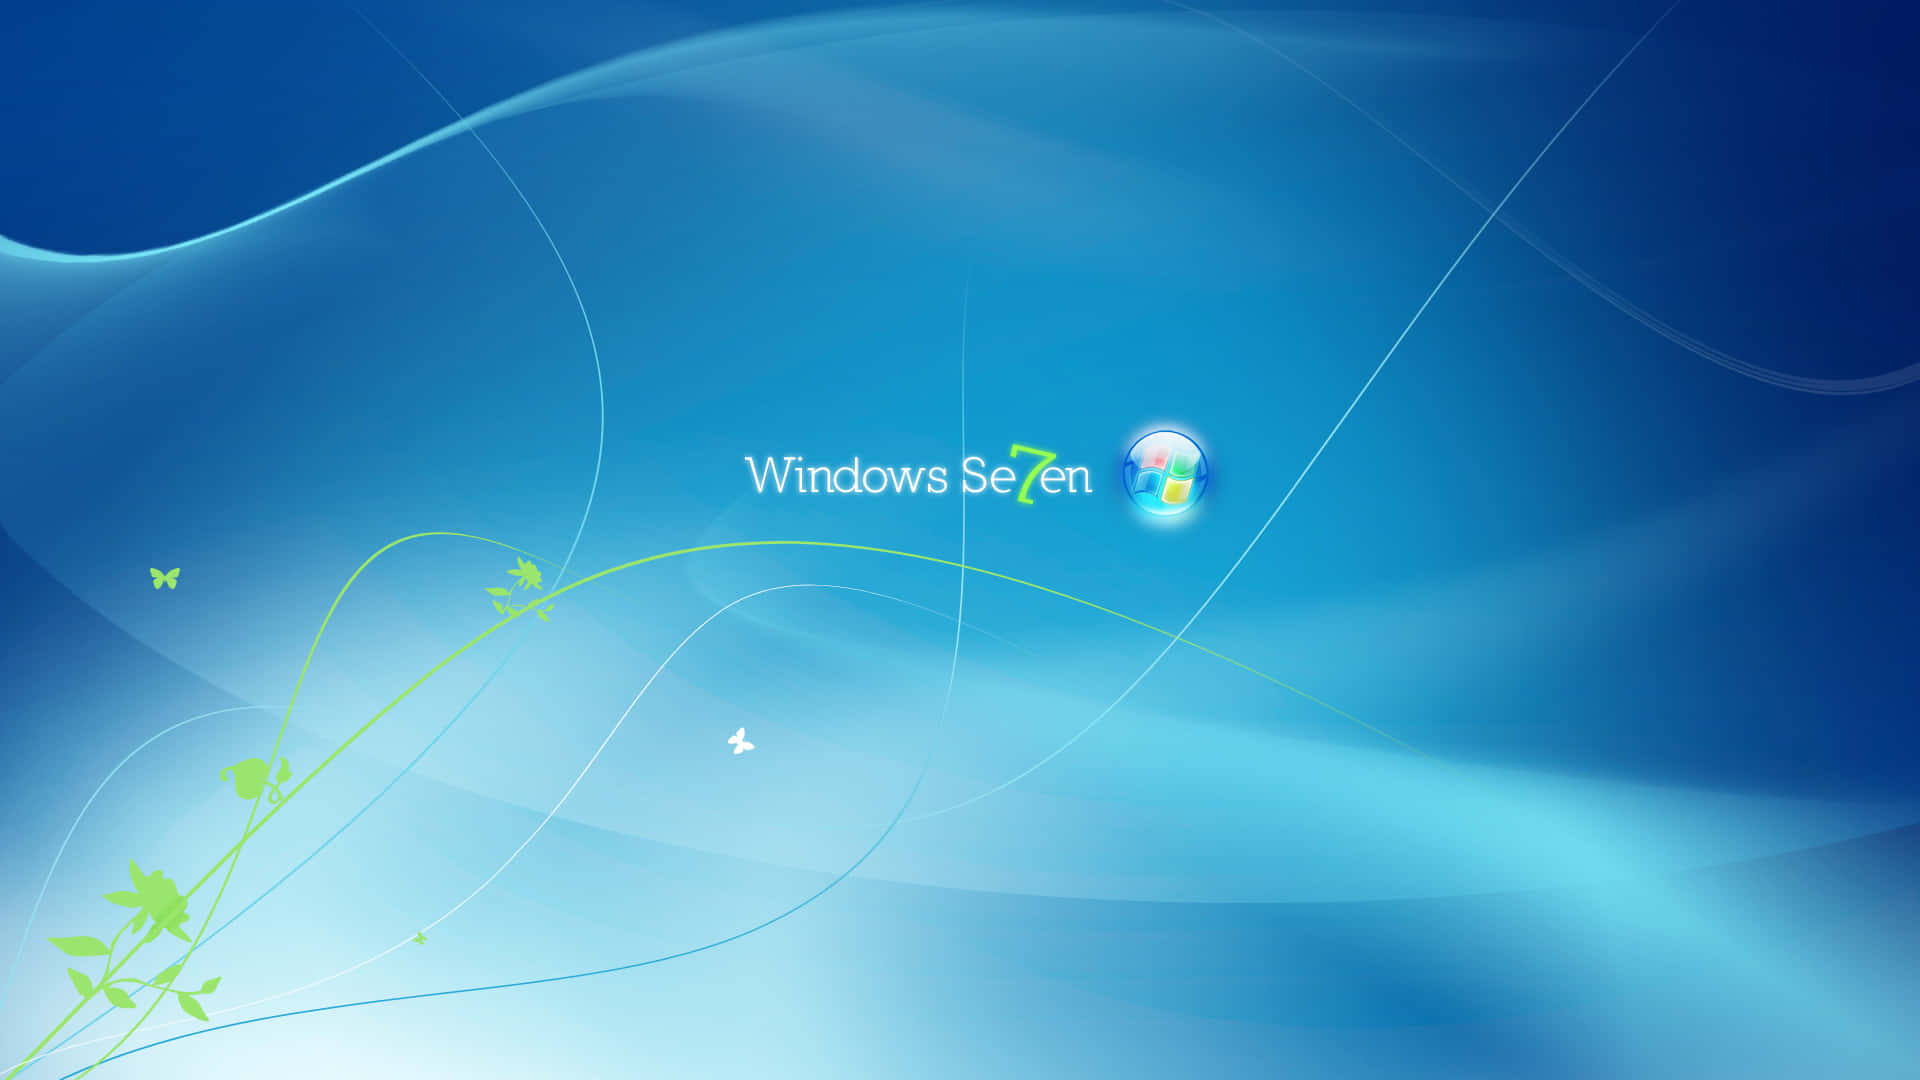 Abstract Windows 8 Background